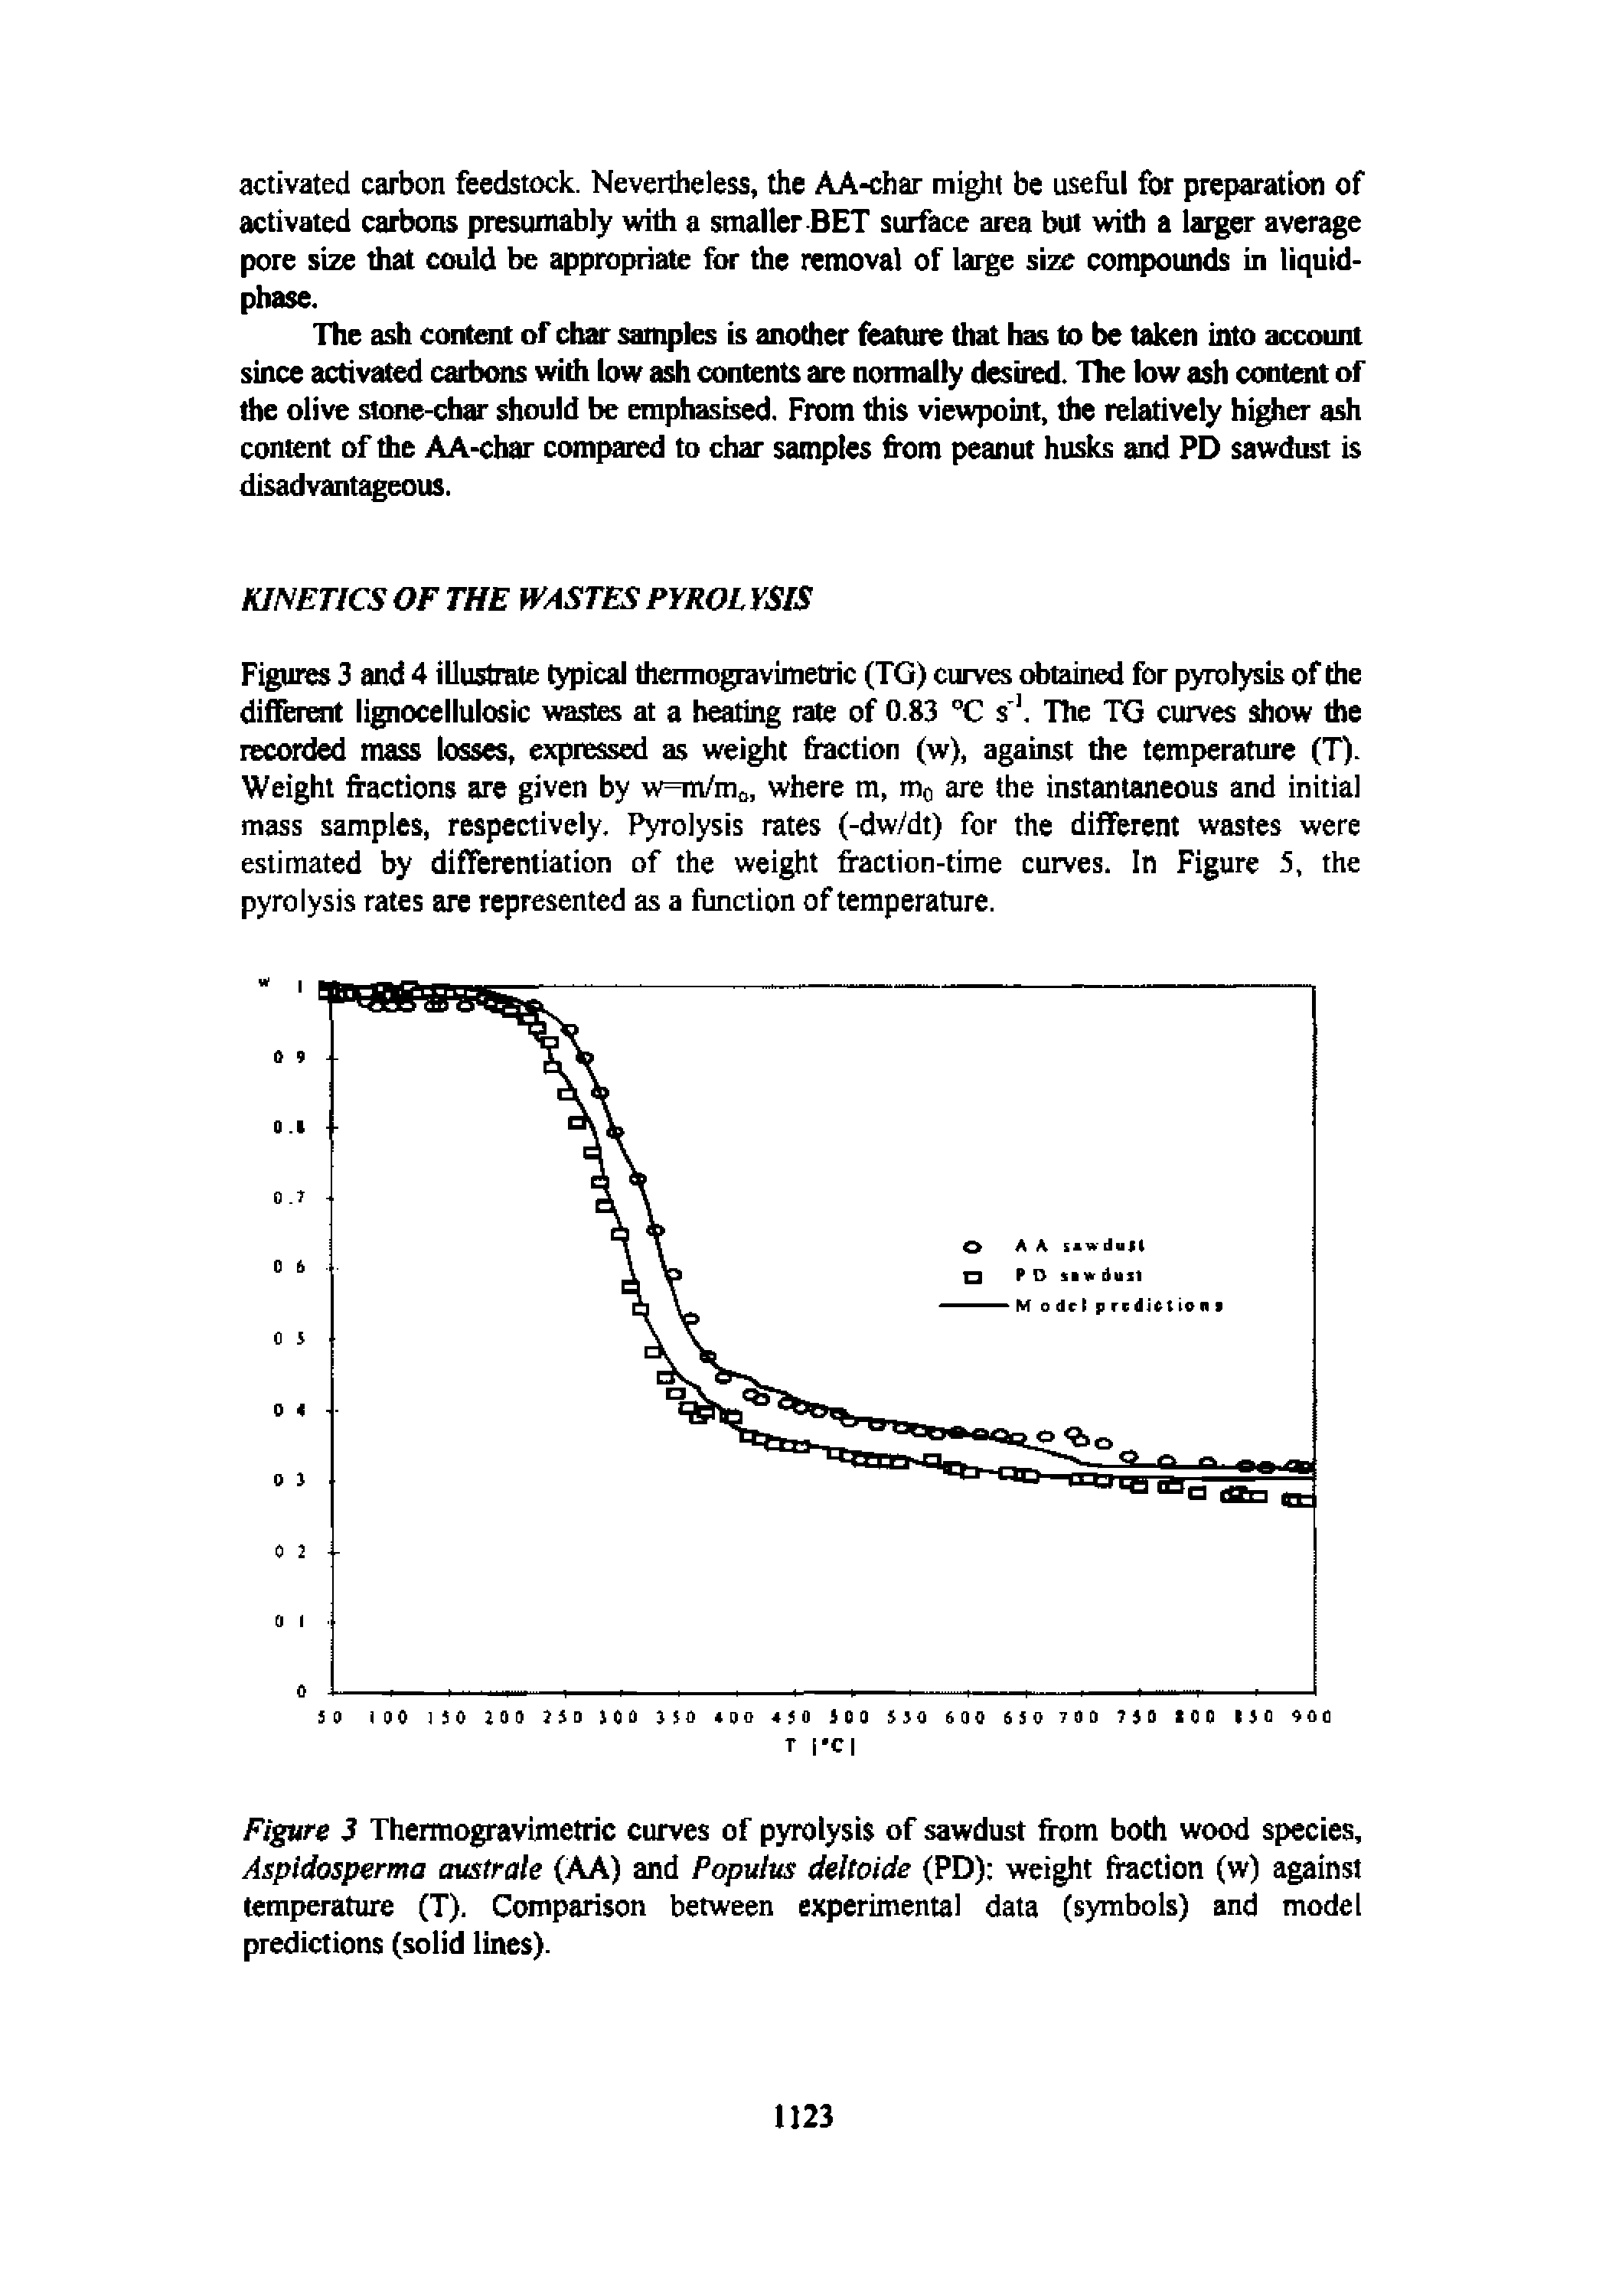 Figures 3 and 4 iUustrate typical thermogravirnetric (TG) curves obtained for pyrolysis of the differmt lignocellulosic wastes at a halting rate of 0.83 "C s. The TG curves show the recorded mass losses, expressed as weight fraction (w), against the temperature (T). Weight fractions are given by w=m/mo, where m, mo are the instantaneous and initial mass samples, respectively. Pyrolysis rates (-dw/dt) for the different wastes were estimated by differentiation of the weight fraction-time curves. In Figure 5, the pyrolysis rates are represented as a function of temperature.